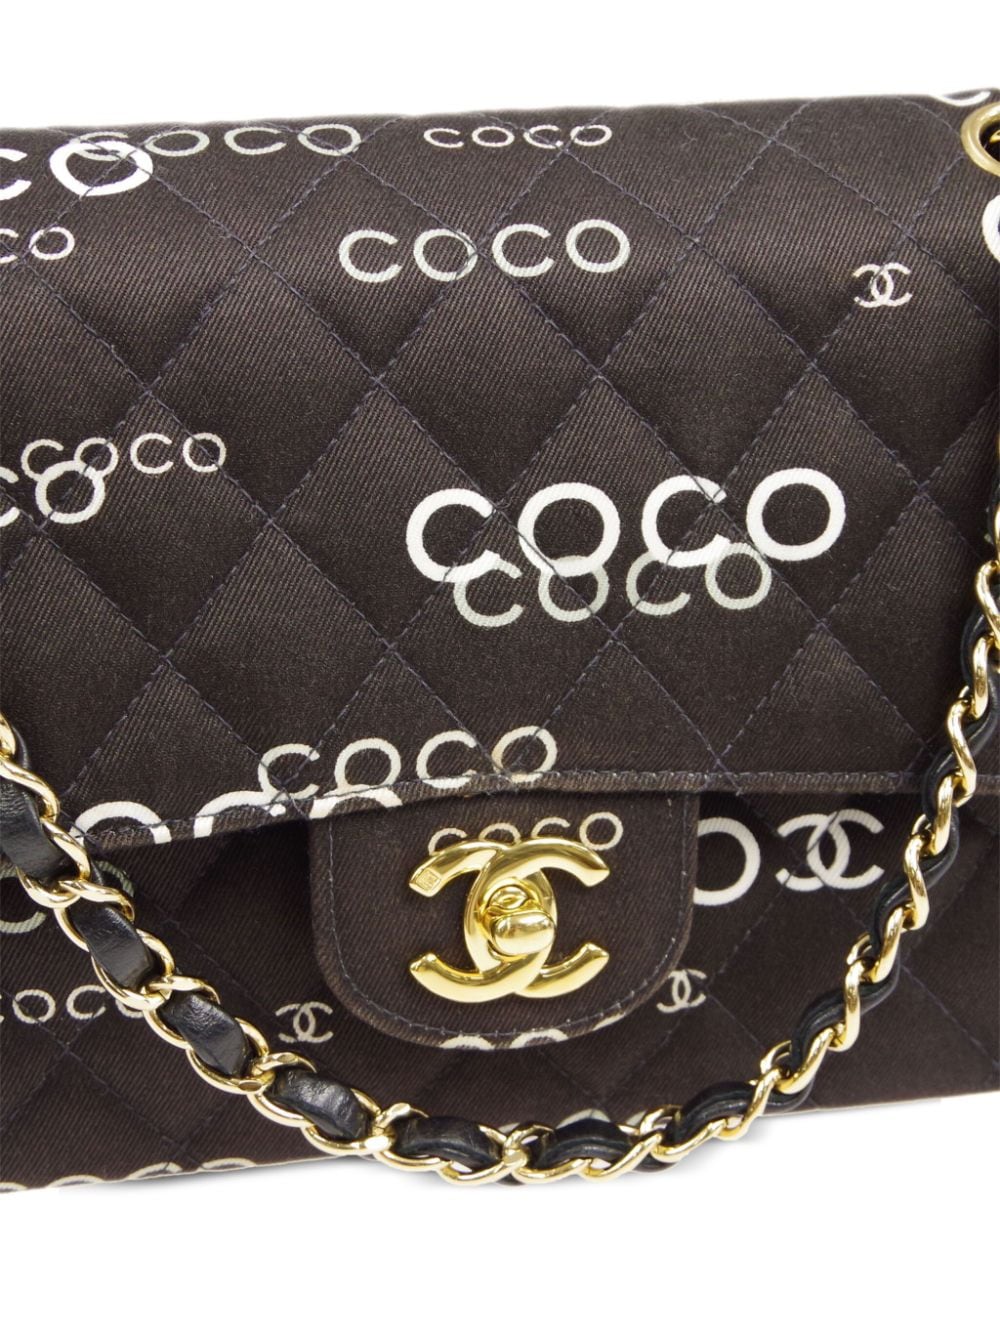 Chanel Multicolor Printed Nylon Medium Coco Color Flap Bag - Handbag | Pre-owned & Certified | used Second Hand | Unisex